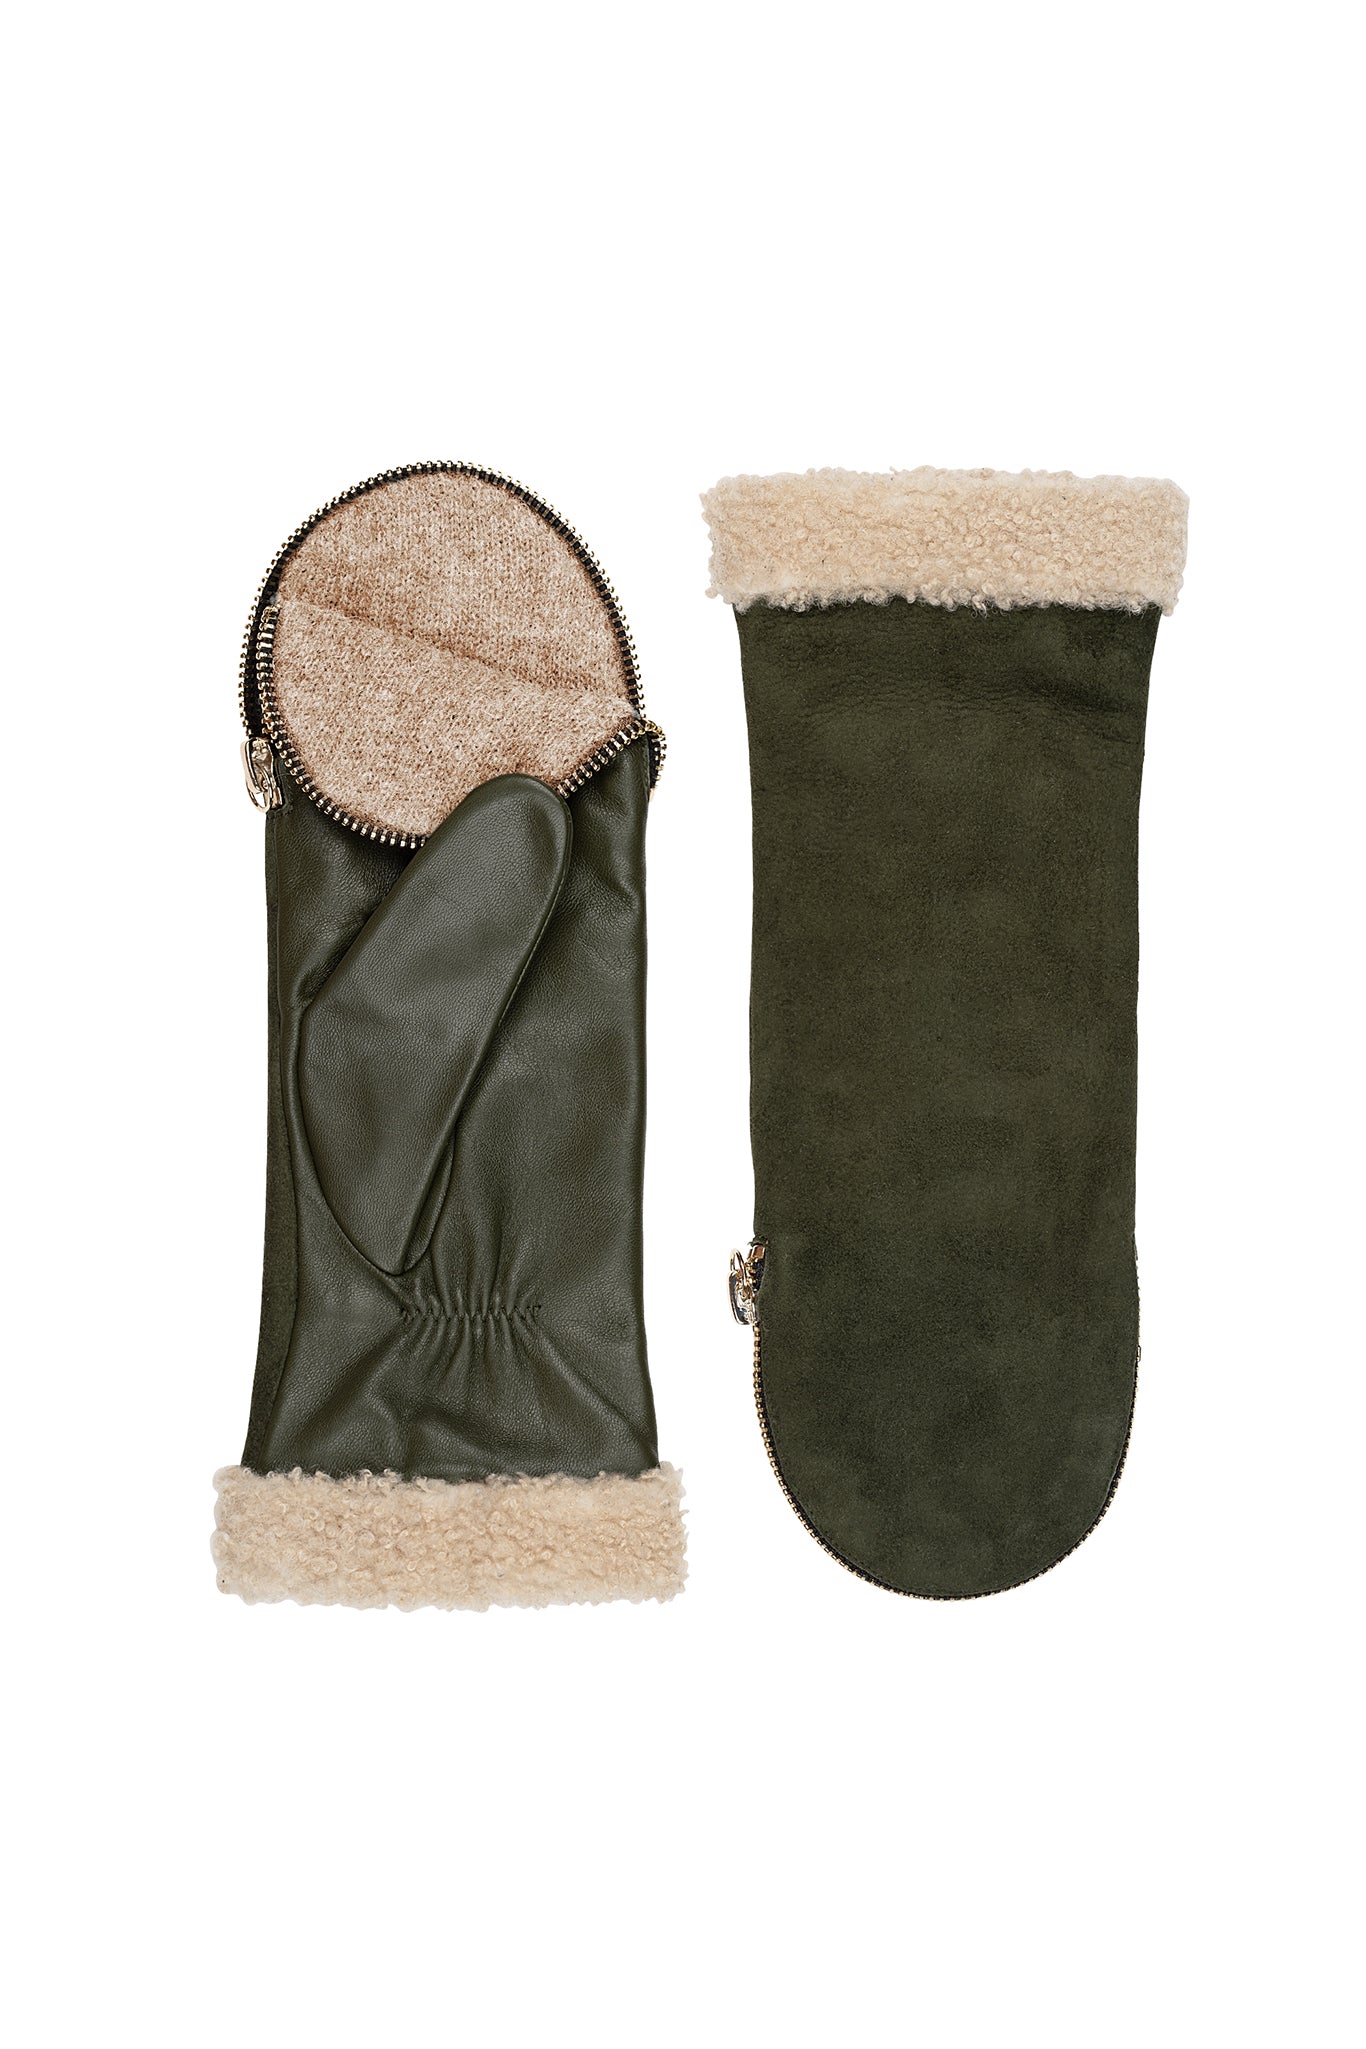 Amato Suede Shearling Cuff Mitten - Olive